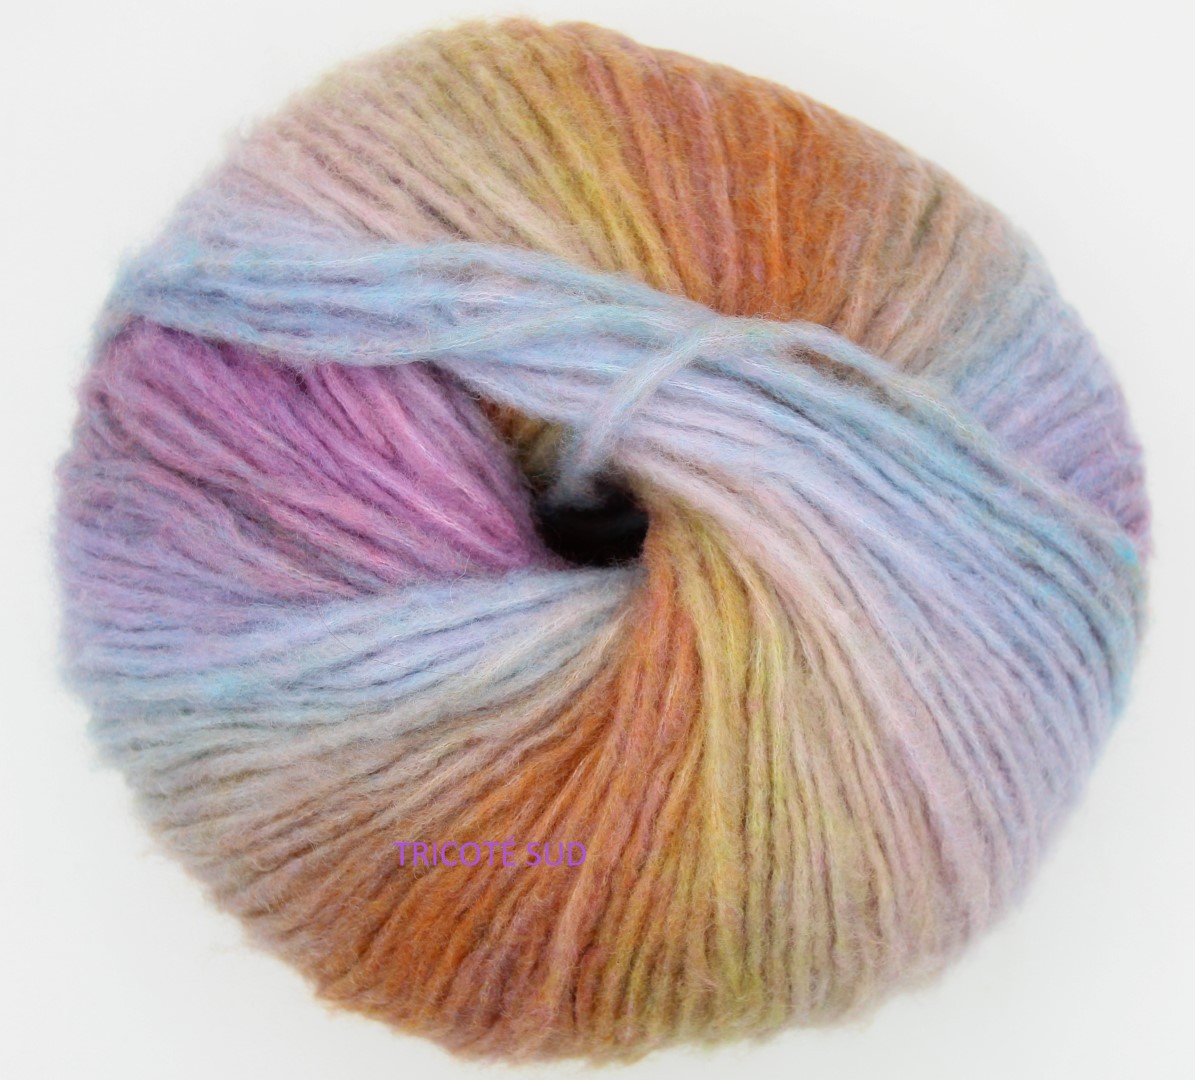 TRICOTE SUD LANG YARNS ORION COLORIS 03 (2) (Large)